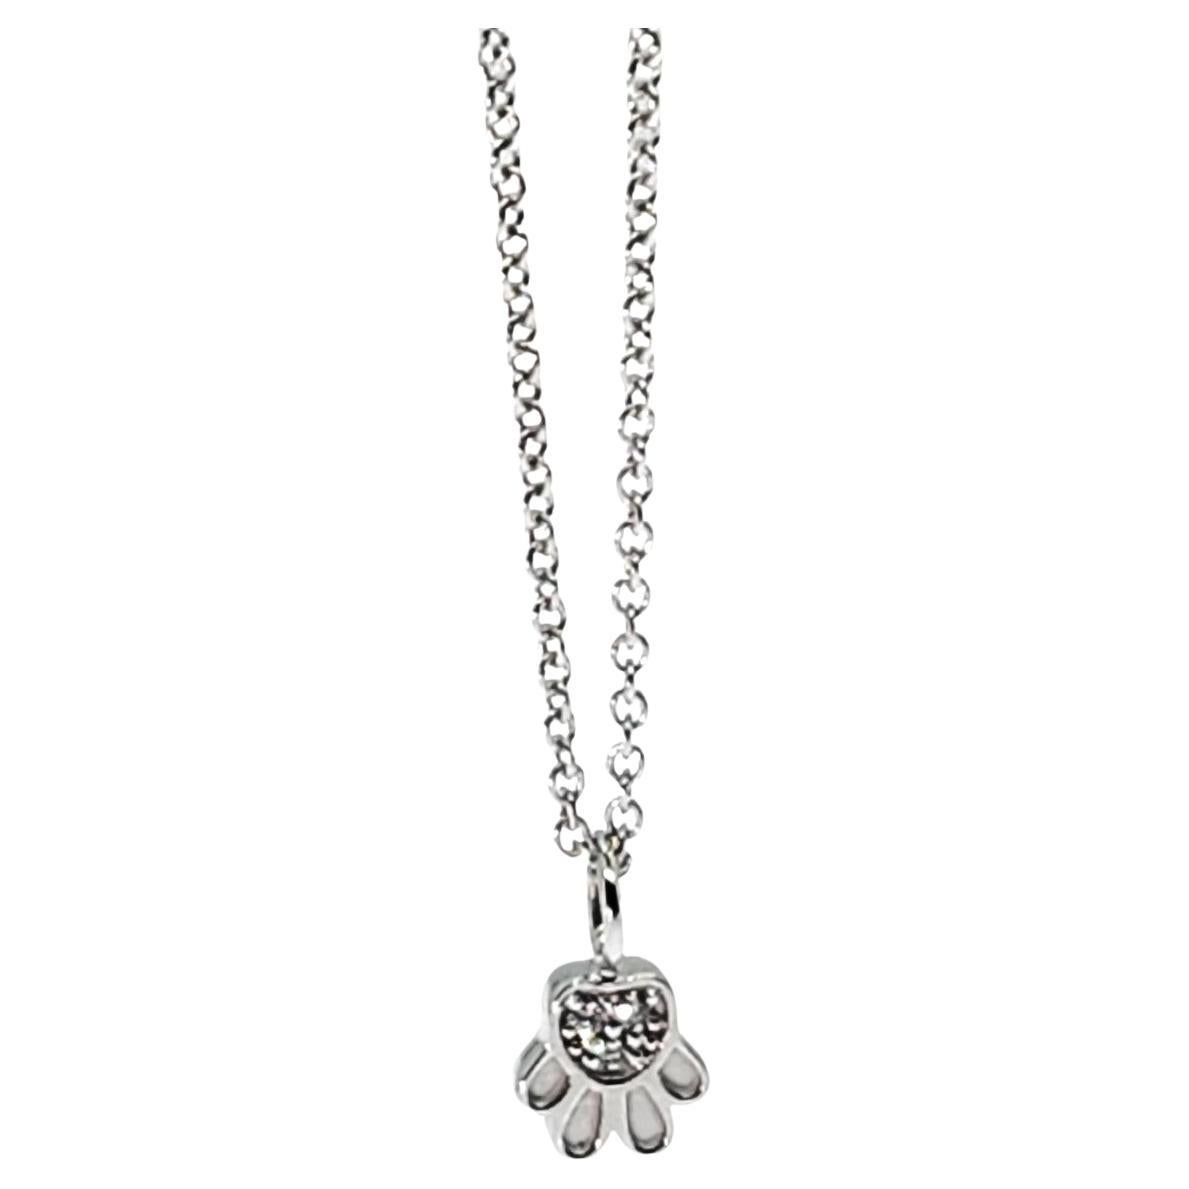 Companion Petite Paw Print Charm Necklace in 14K White Gold and Diamonds